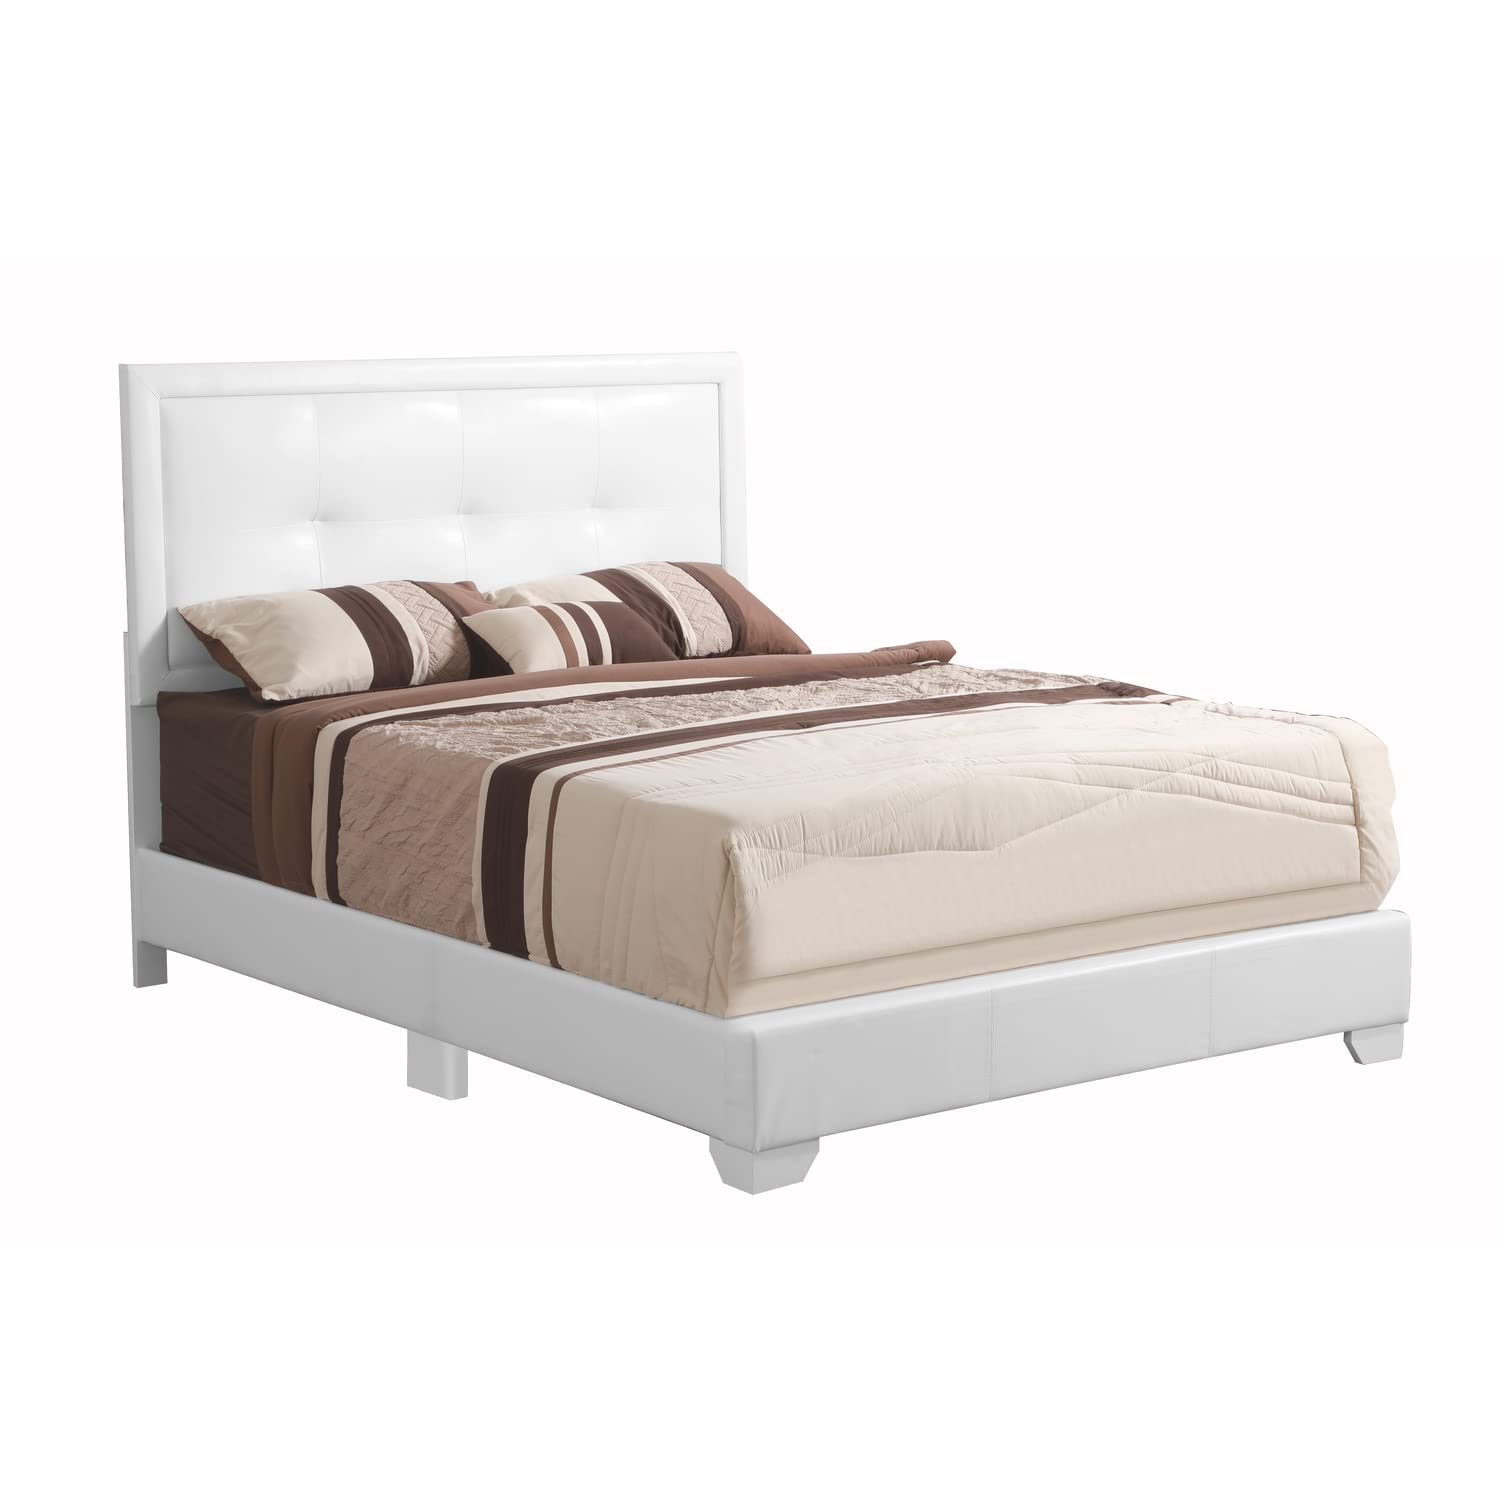 Glory Furniture Panello Faux Leather Upholstered Queen Bed in White